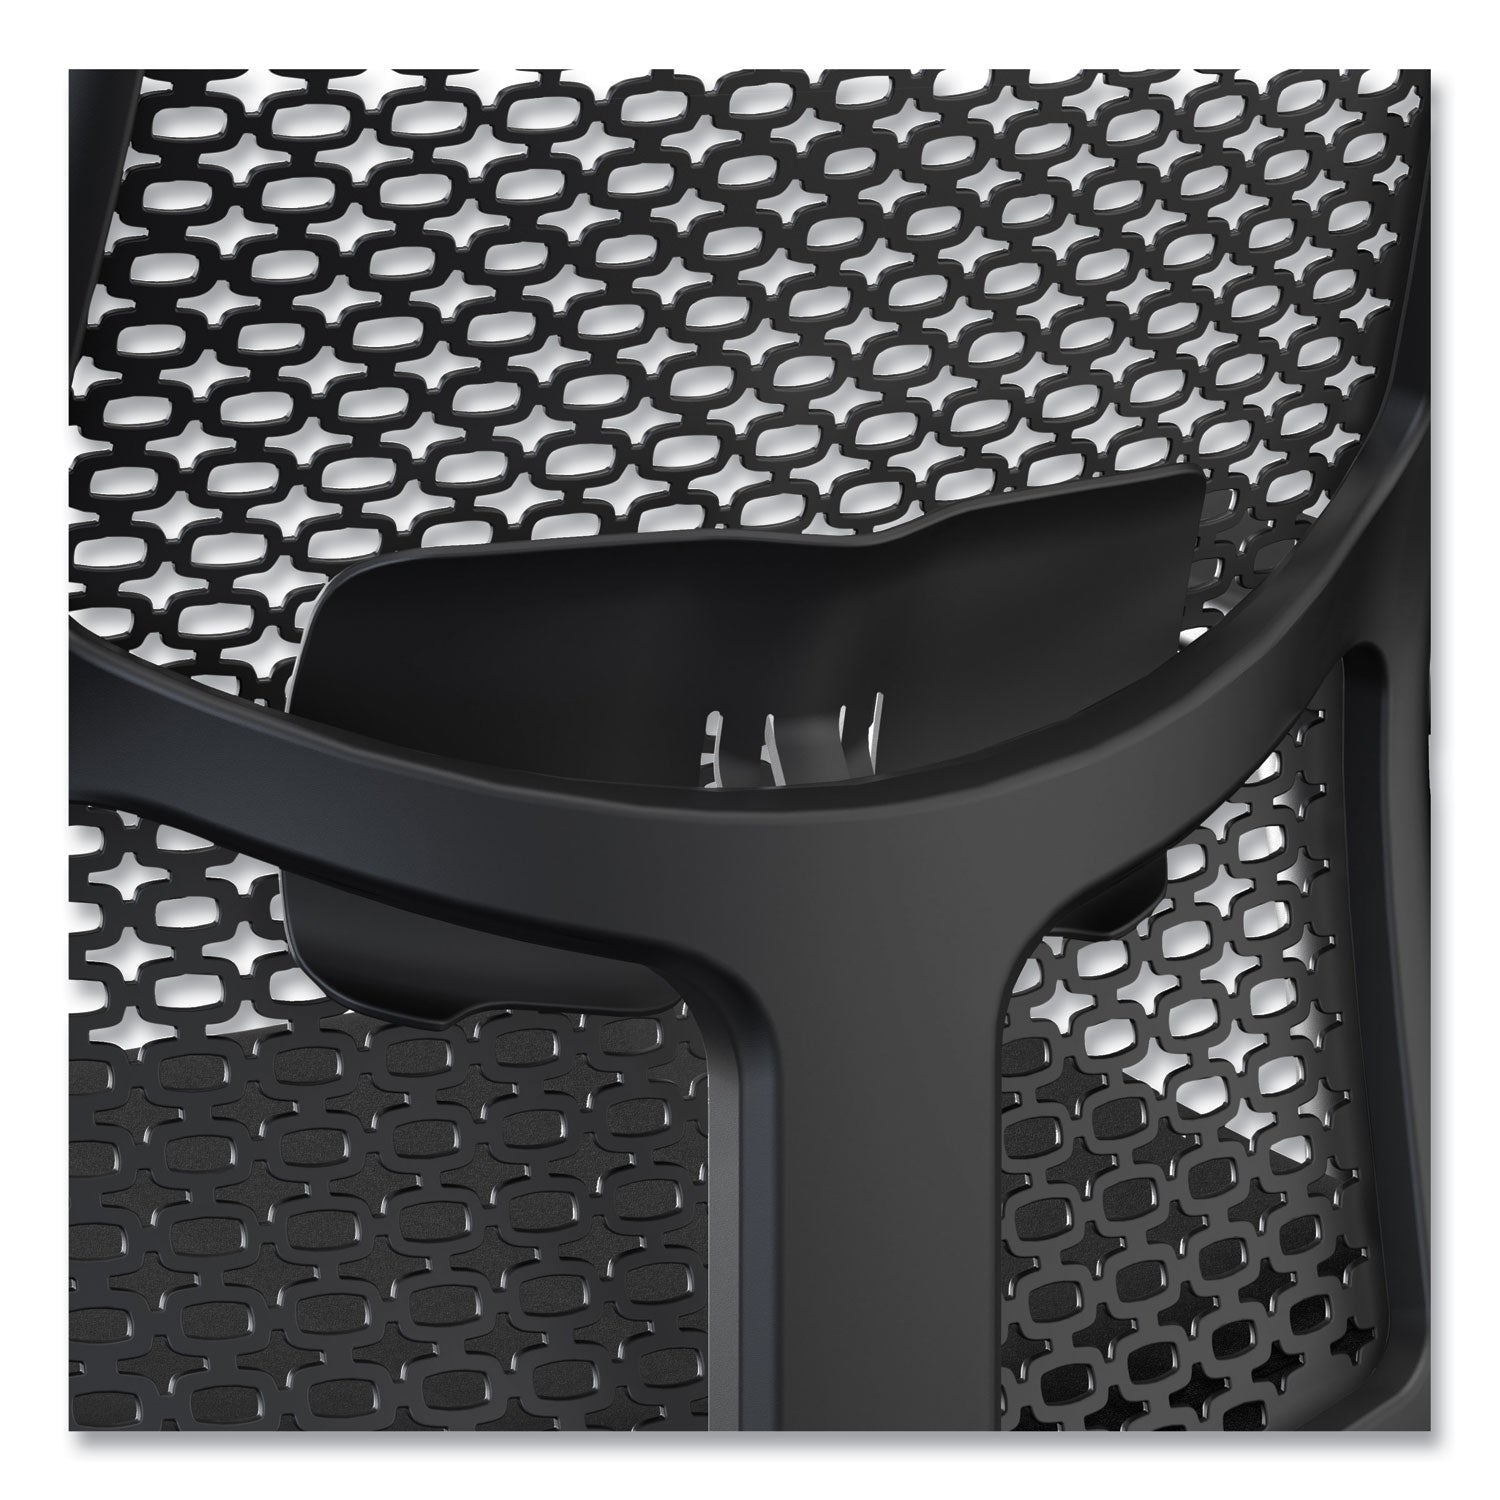 ignition-20-reactiv-mid-back-task-chair-1725-to-2175-seat-height-black-fabric-seat-black-back-ships-in-7-10-bus-days_honi2mrl2bc10tk - 3